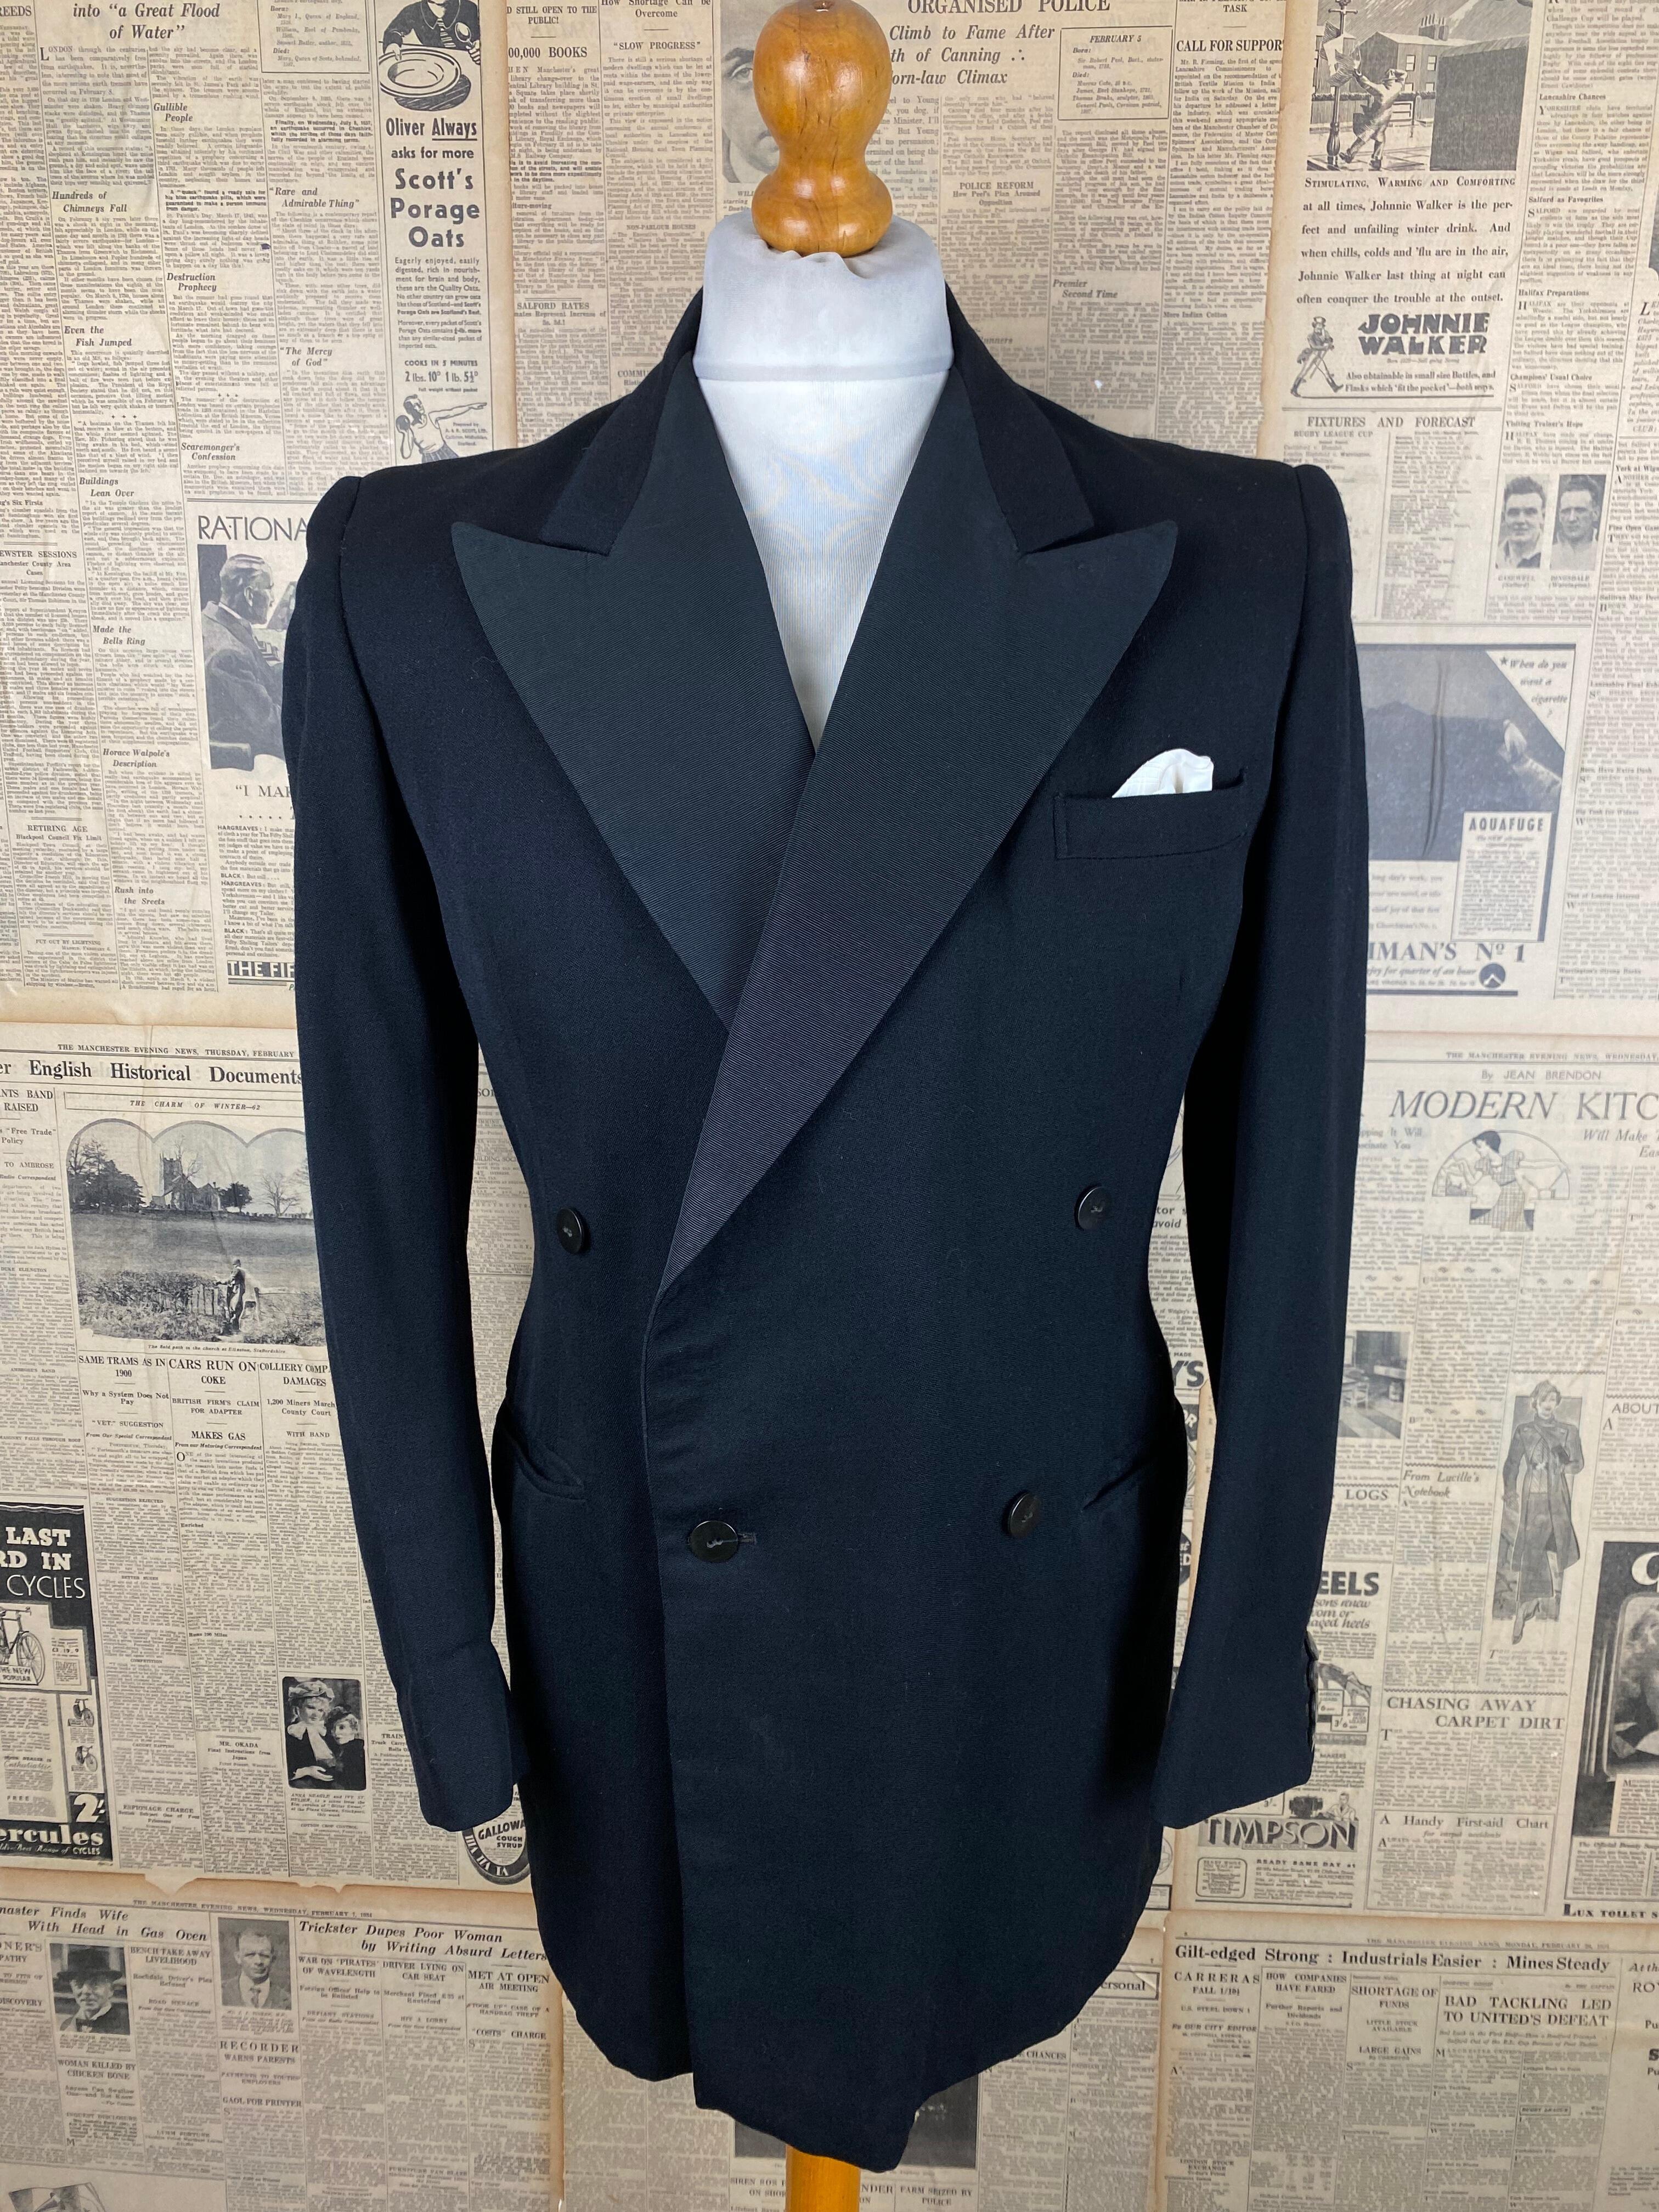 Vintage 1930's double breasted dinner jacket size 38